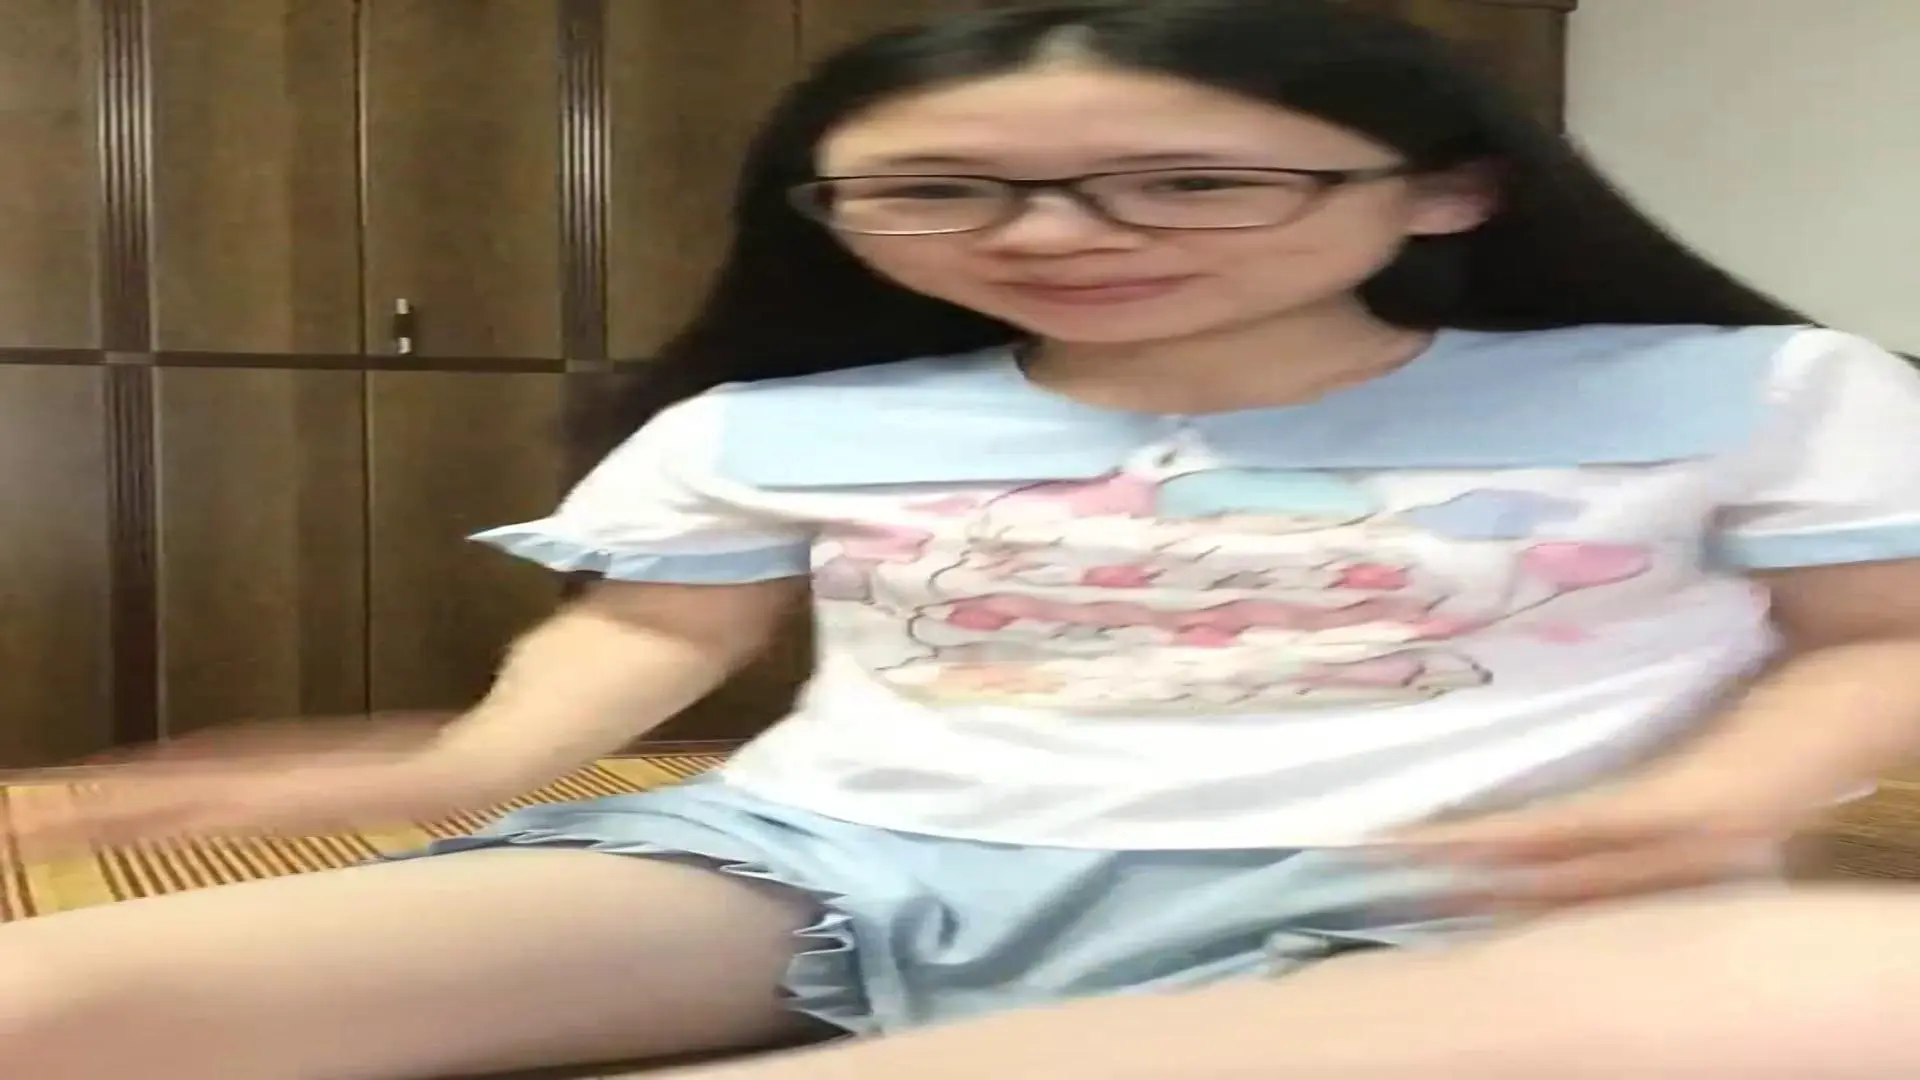 Asian Teen Hairy - Cute Chinese Teen in Glasses With Hairy Pussy - WATCH PART 2 ON  teencamslive.com - Sunporno